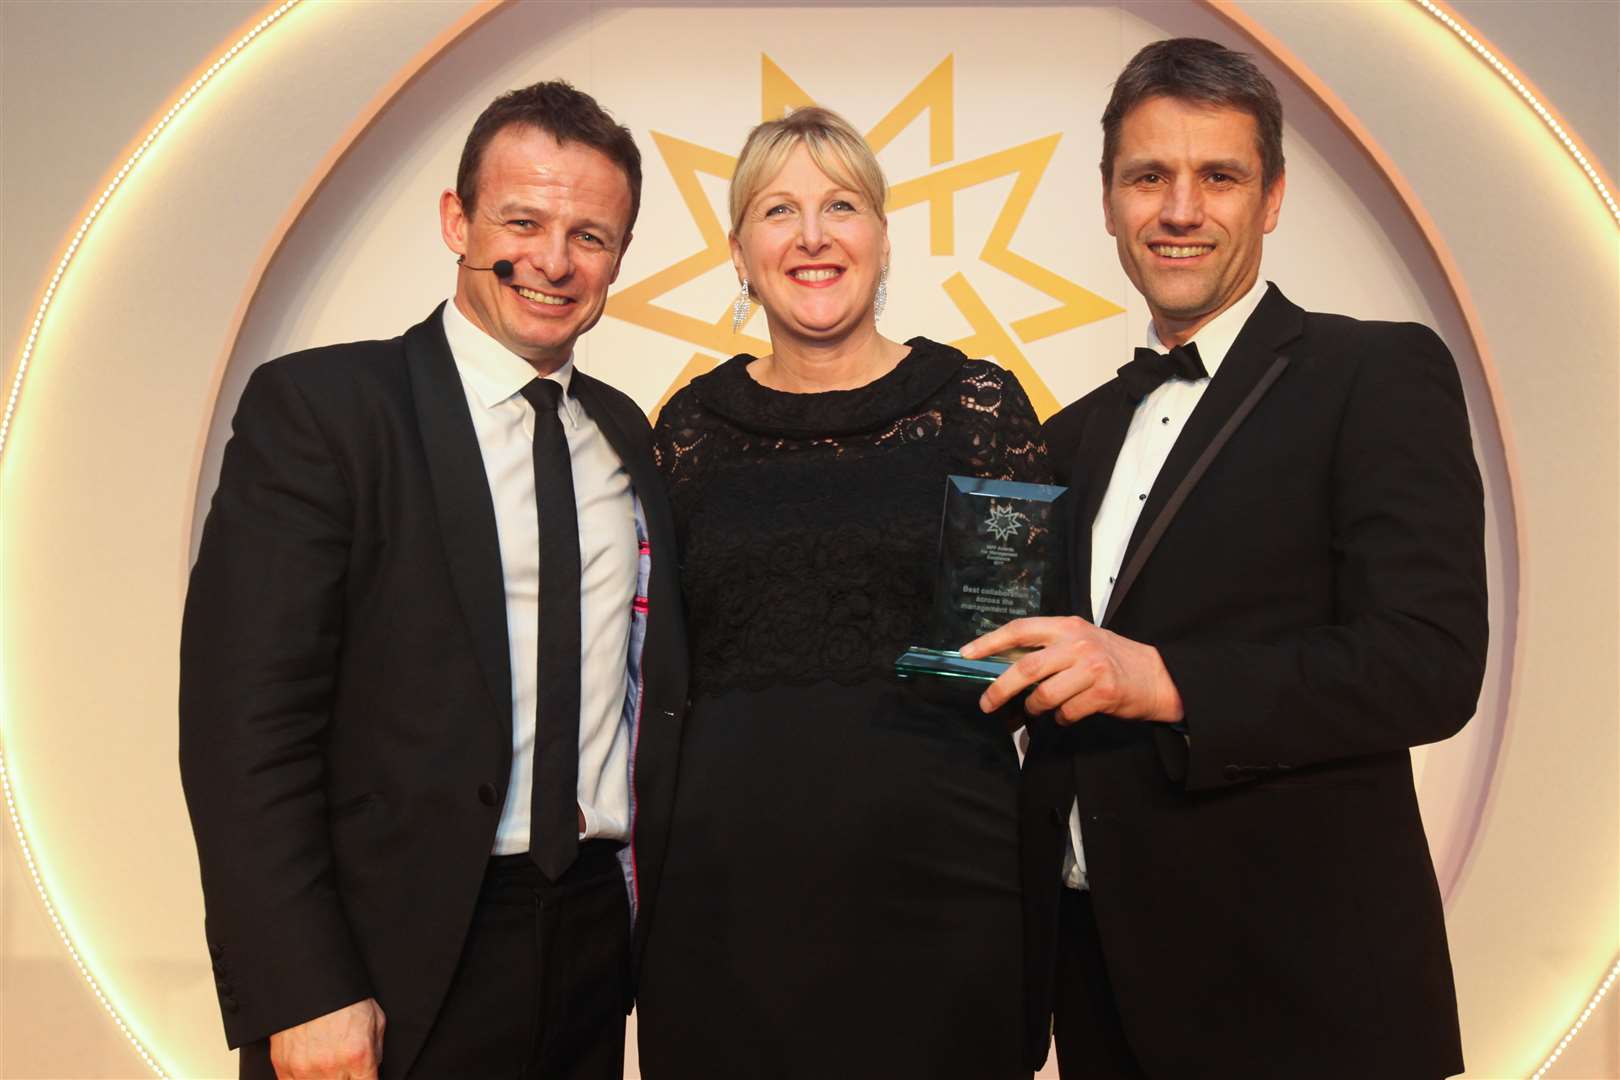 Brachers managing partner Jo Worby collects the award from rugby star Austin Healey, left, and Ben Kent of Meridian West